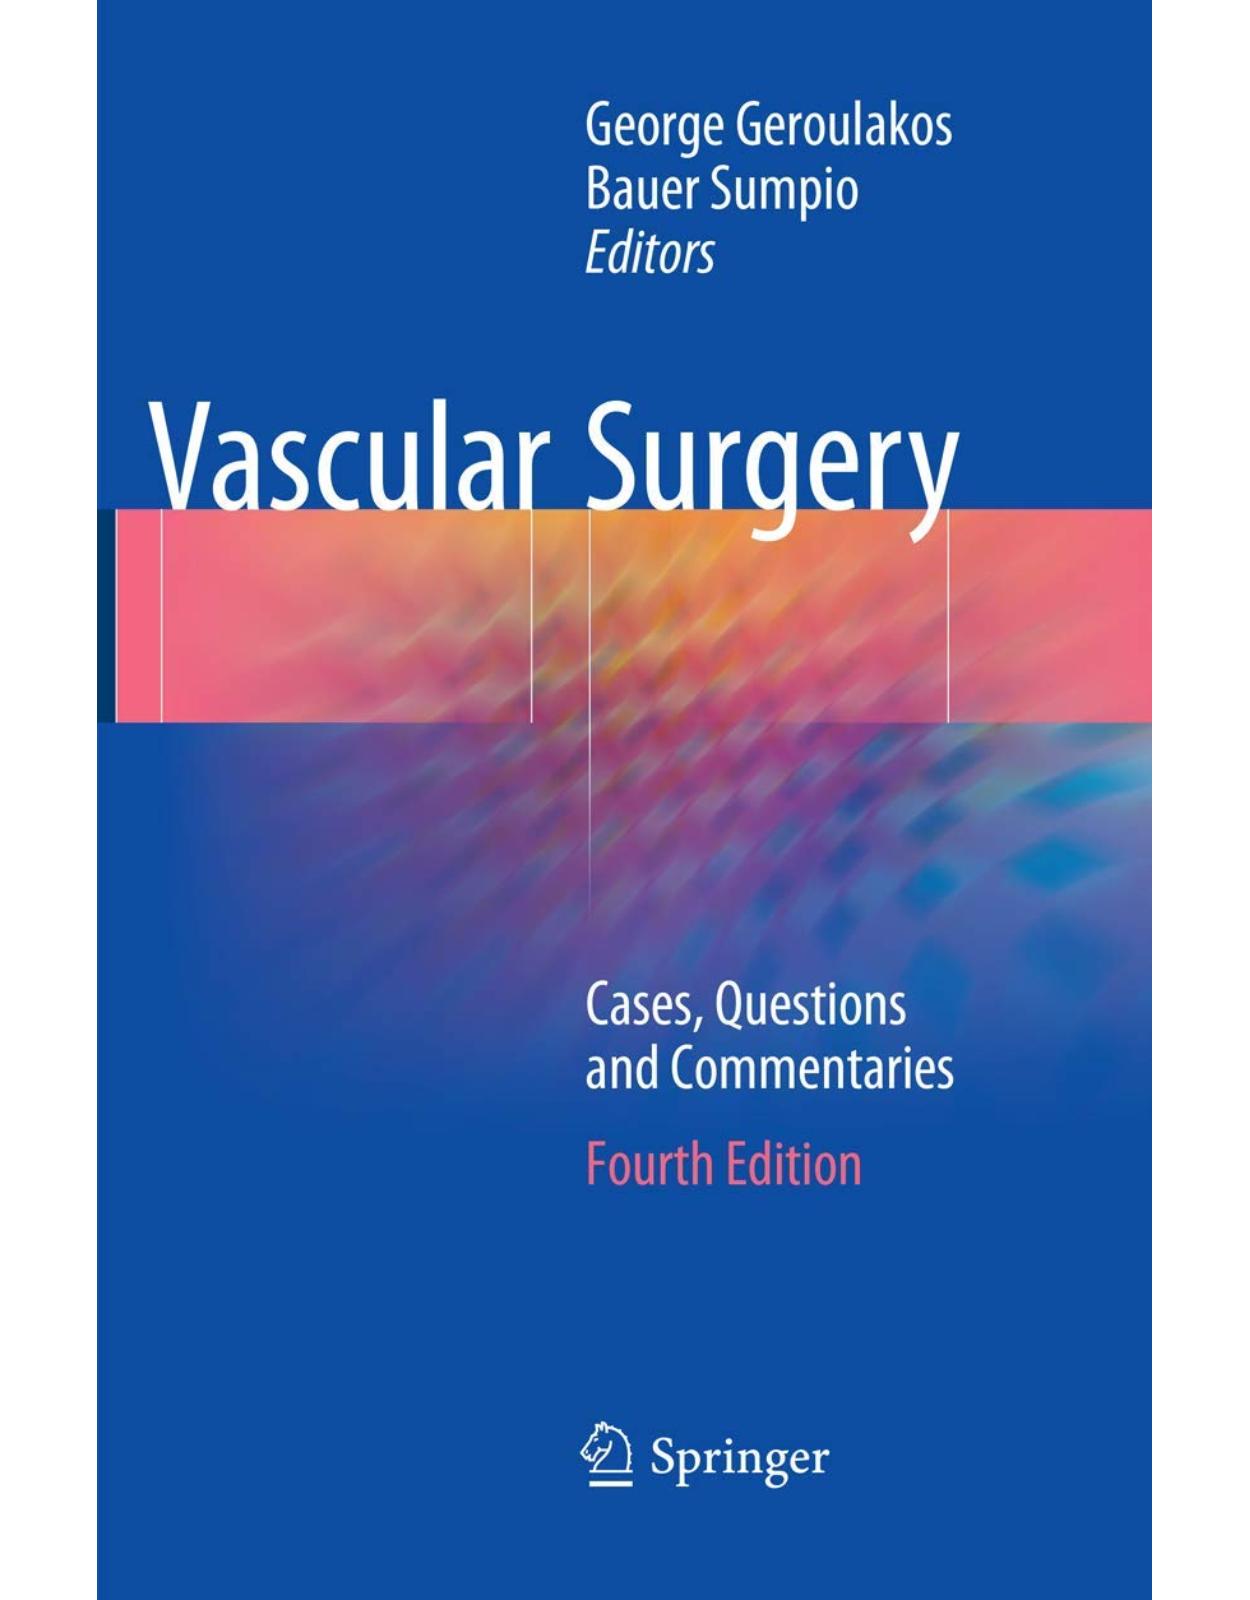 Vascular Surgery: Cases, Questions and Commentaries 